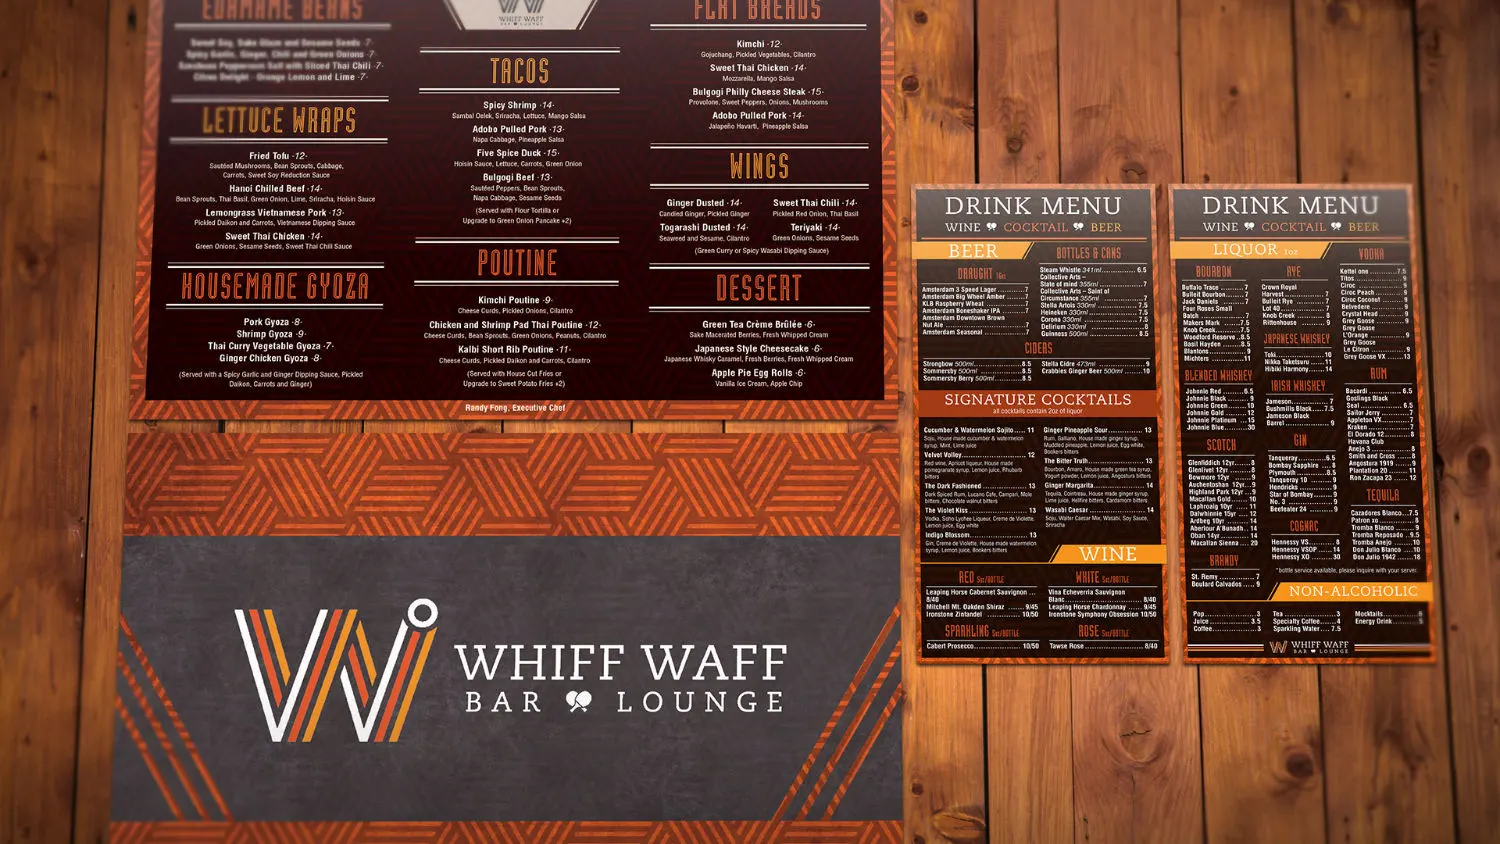 Graphic design project for Whiff Waff Bar & Lounge. Designed menus